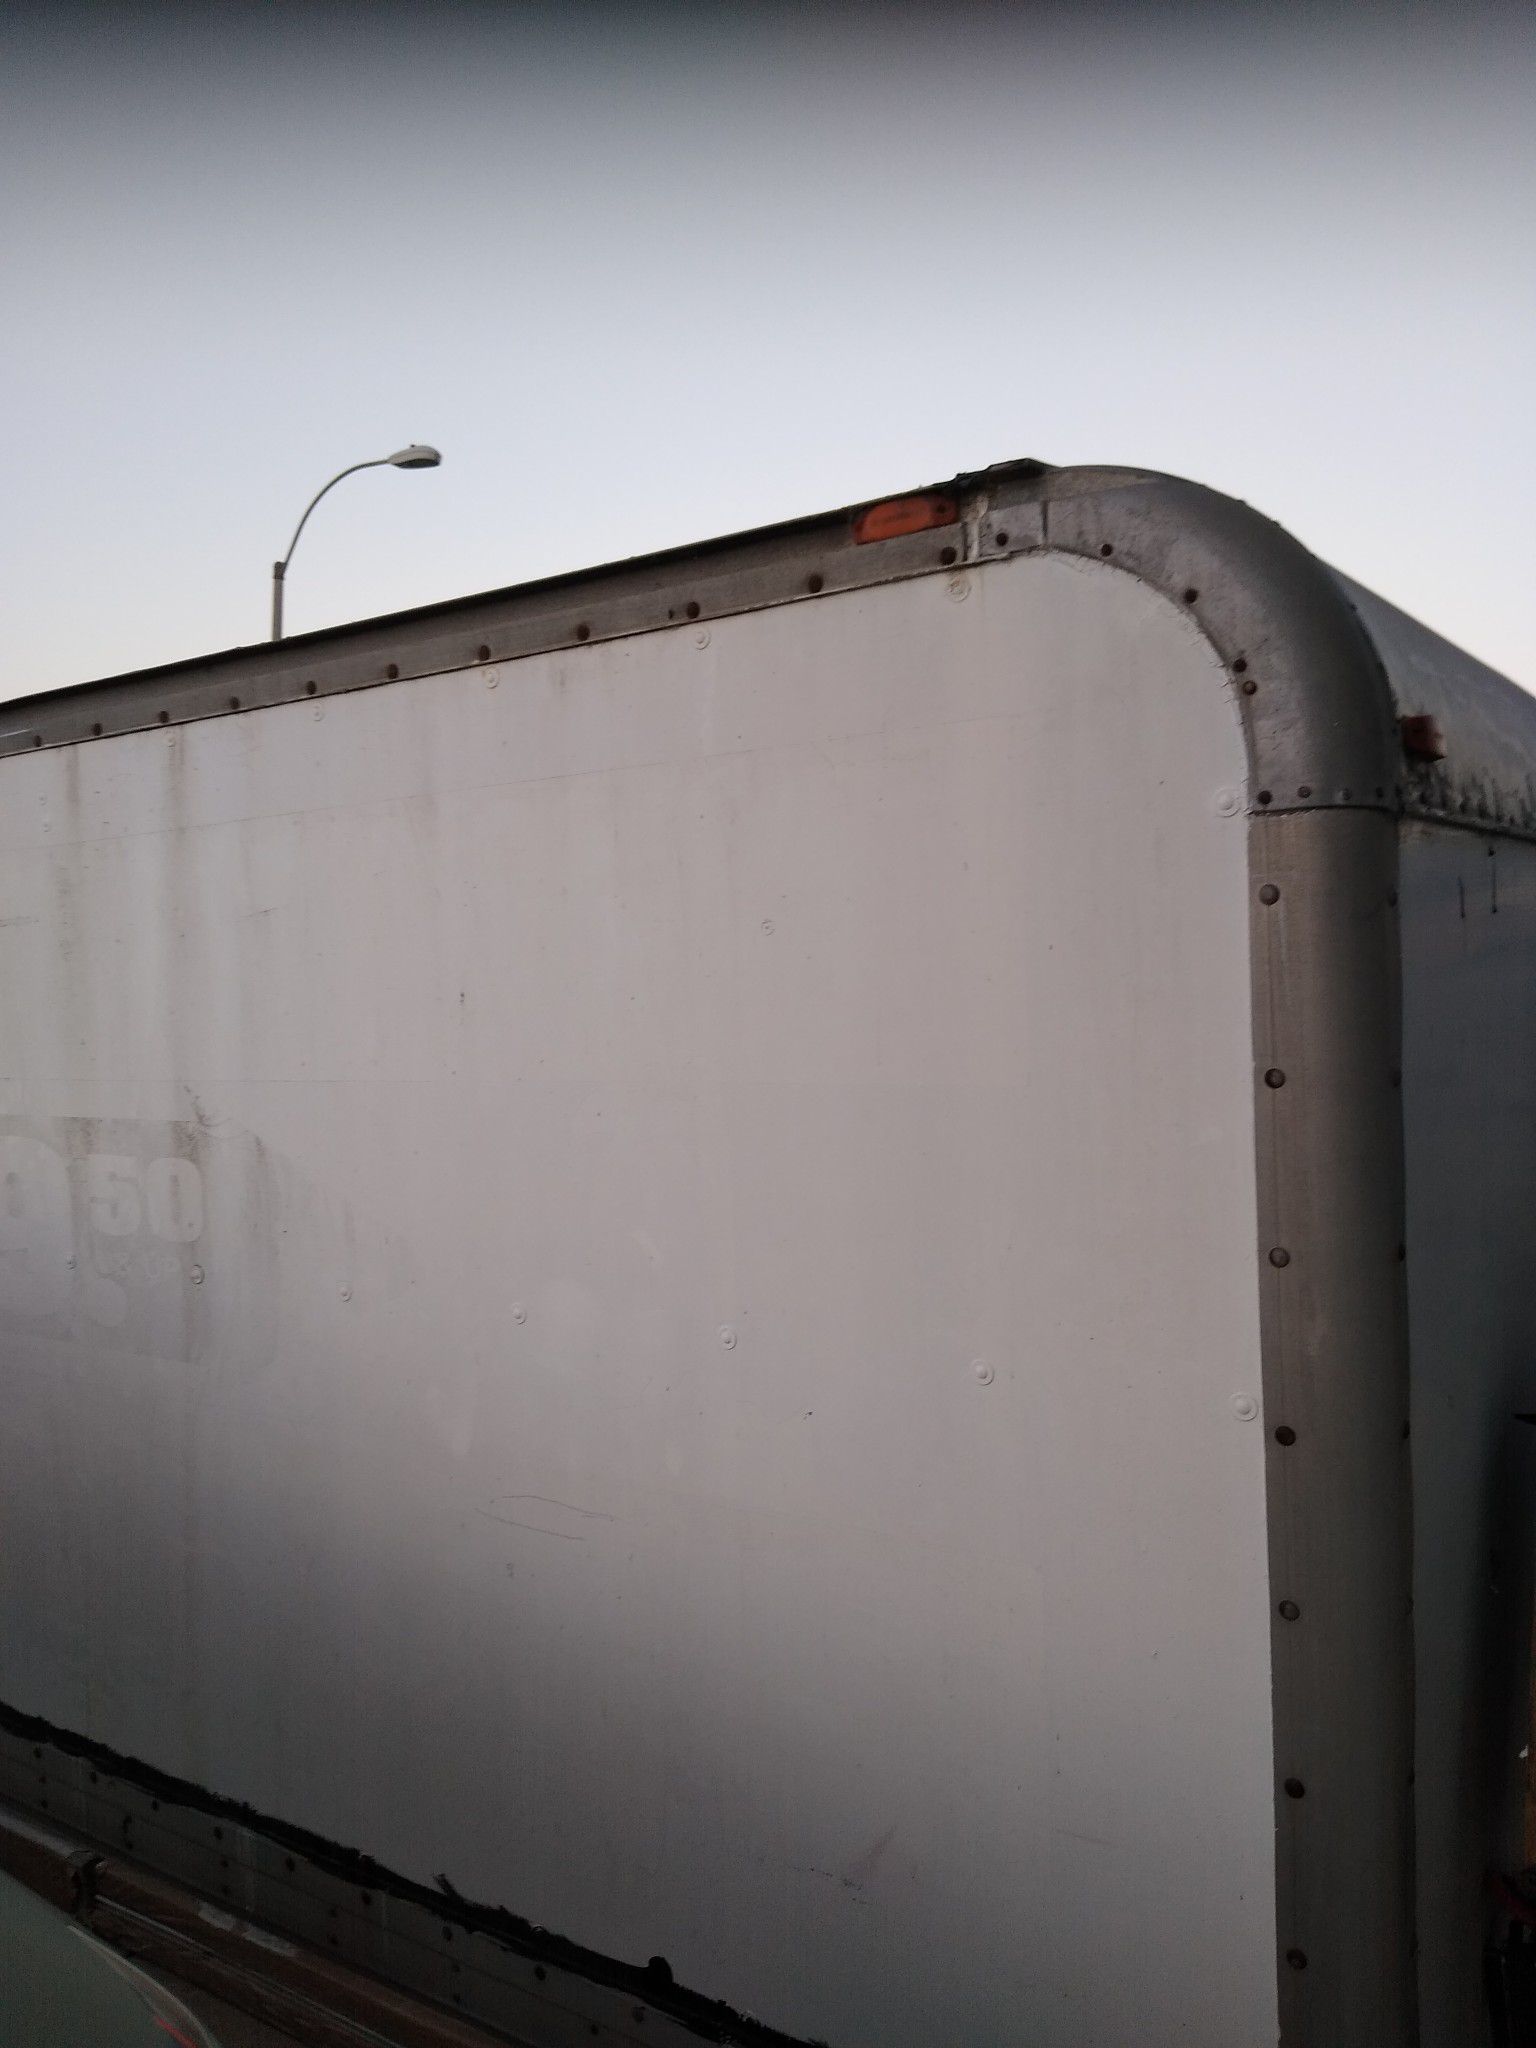 Trailer box came out of truck